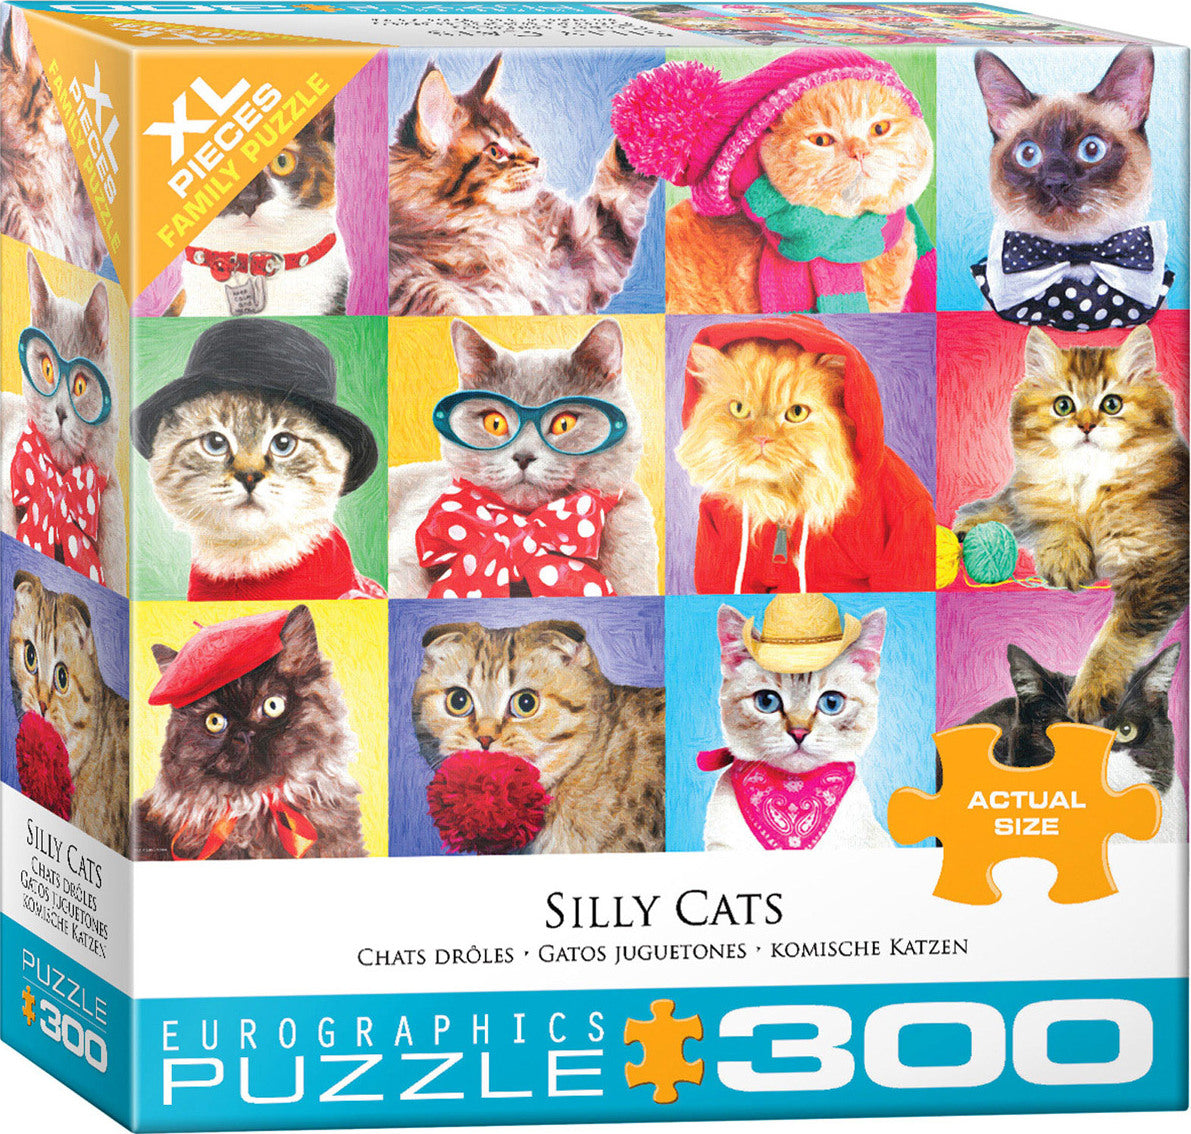 Silly Cats Large Piece Puzzles